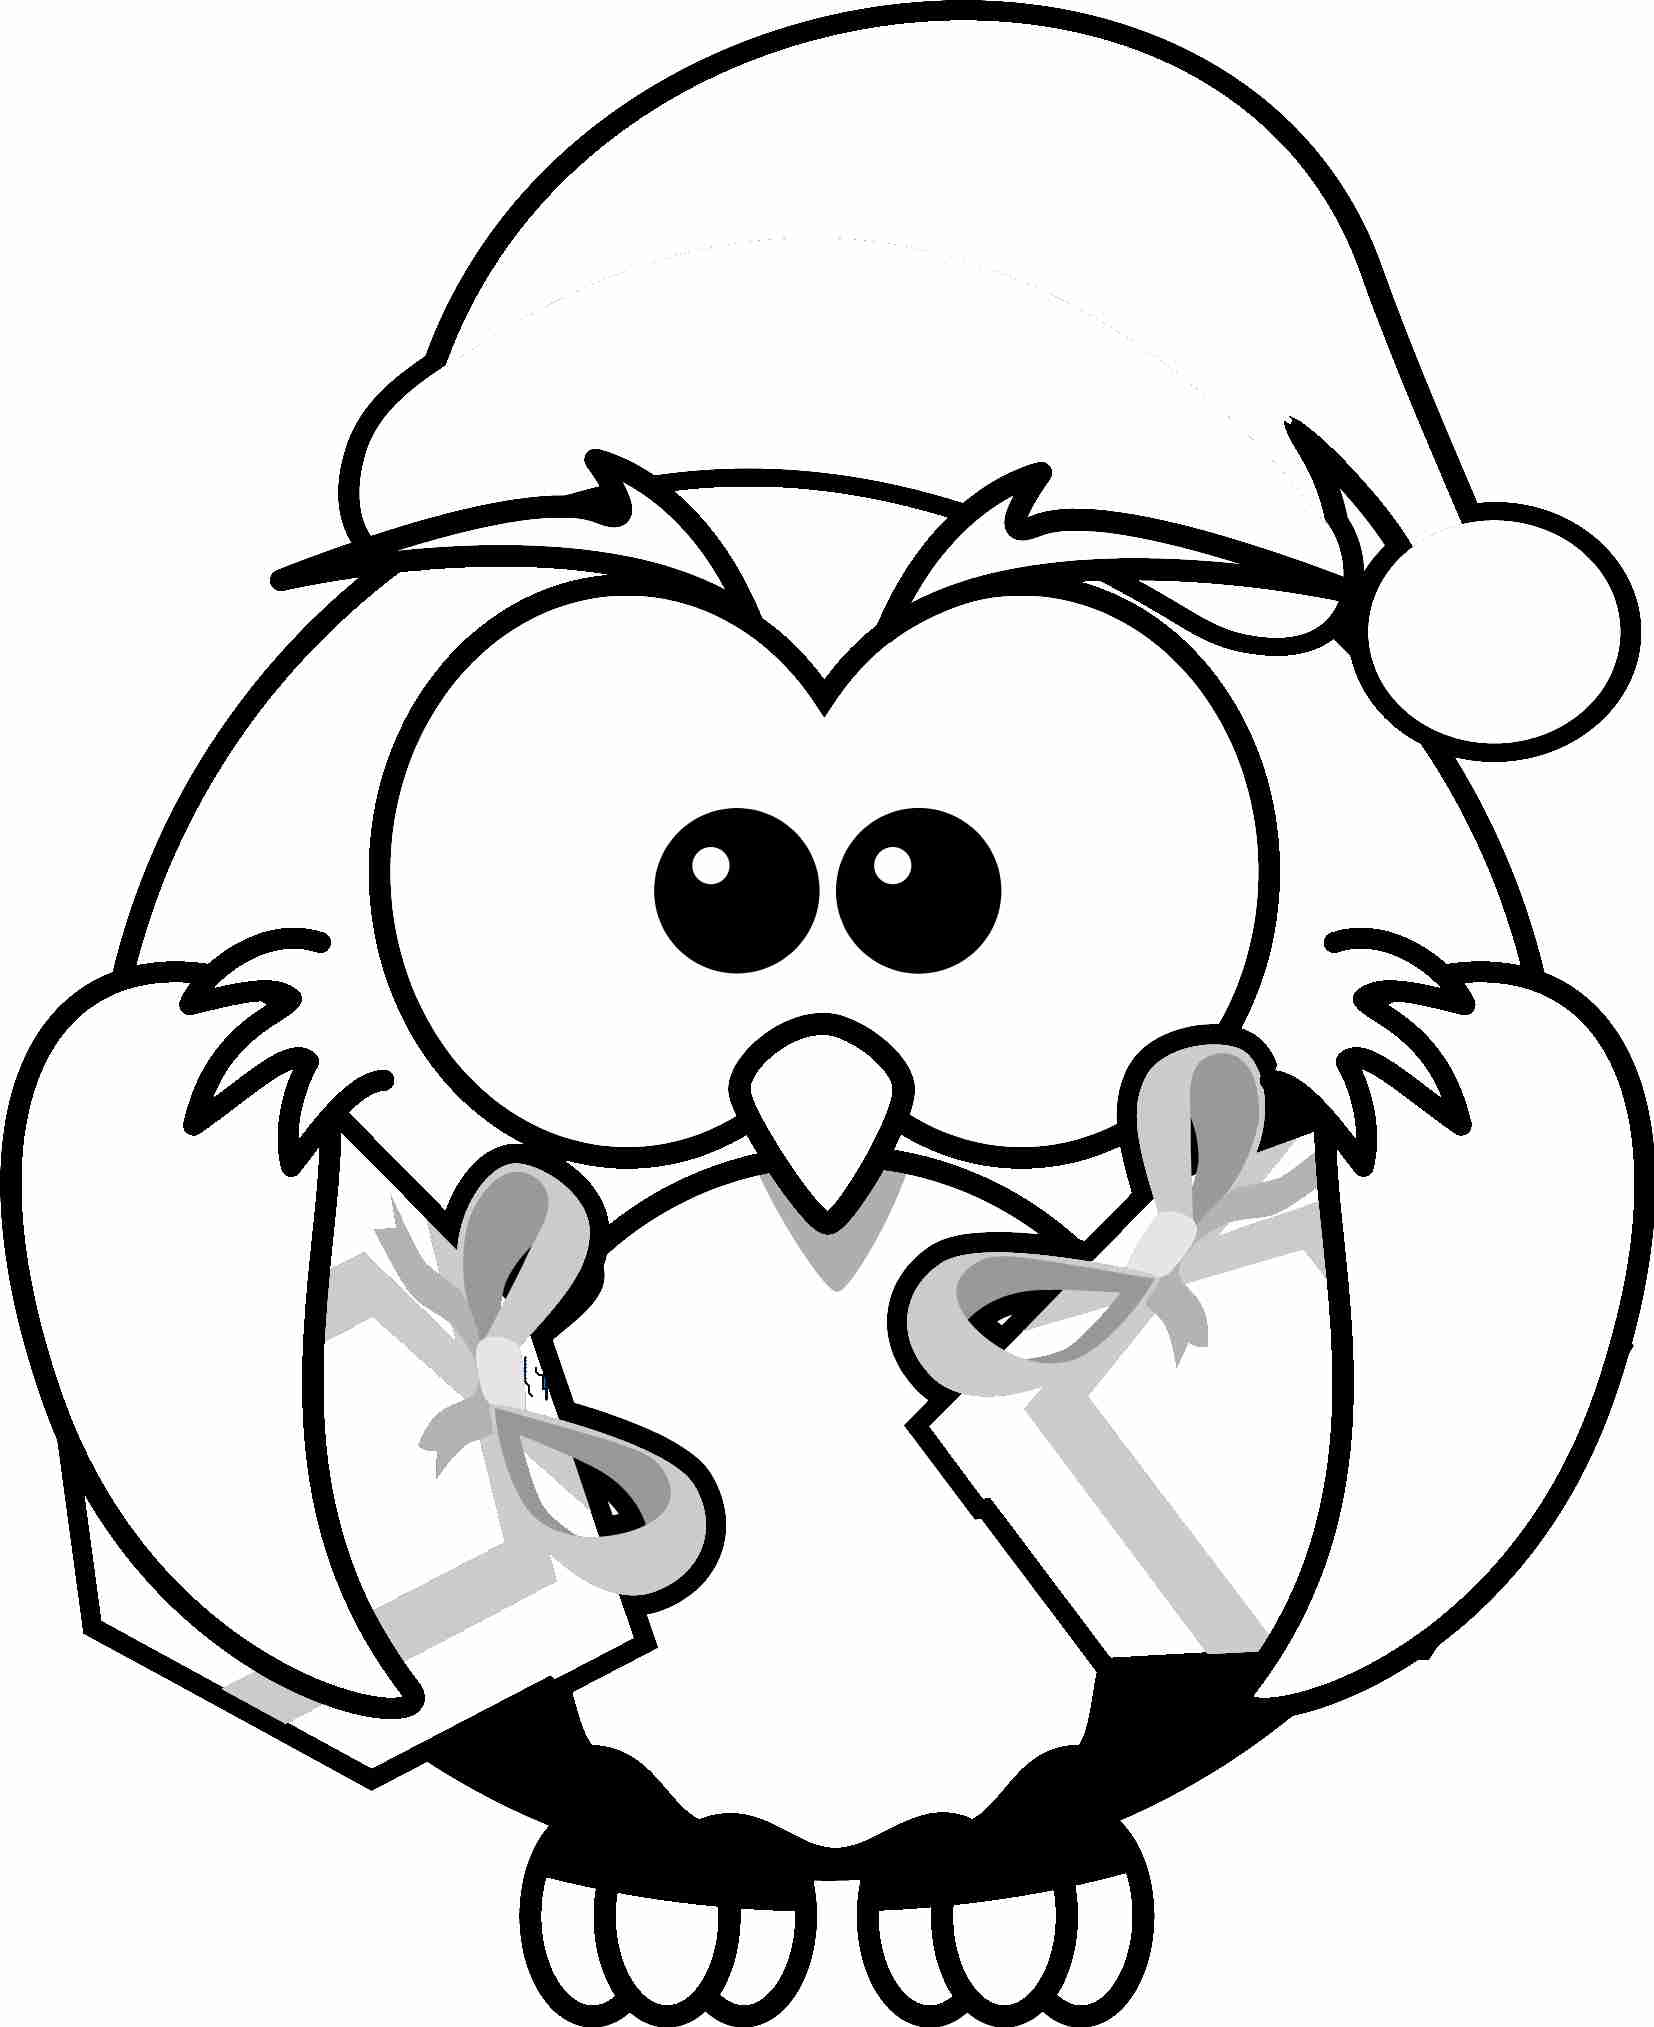 6 Pics of Christmas Cat Coloring Pages For Kids - Christmas Cat ...